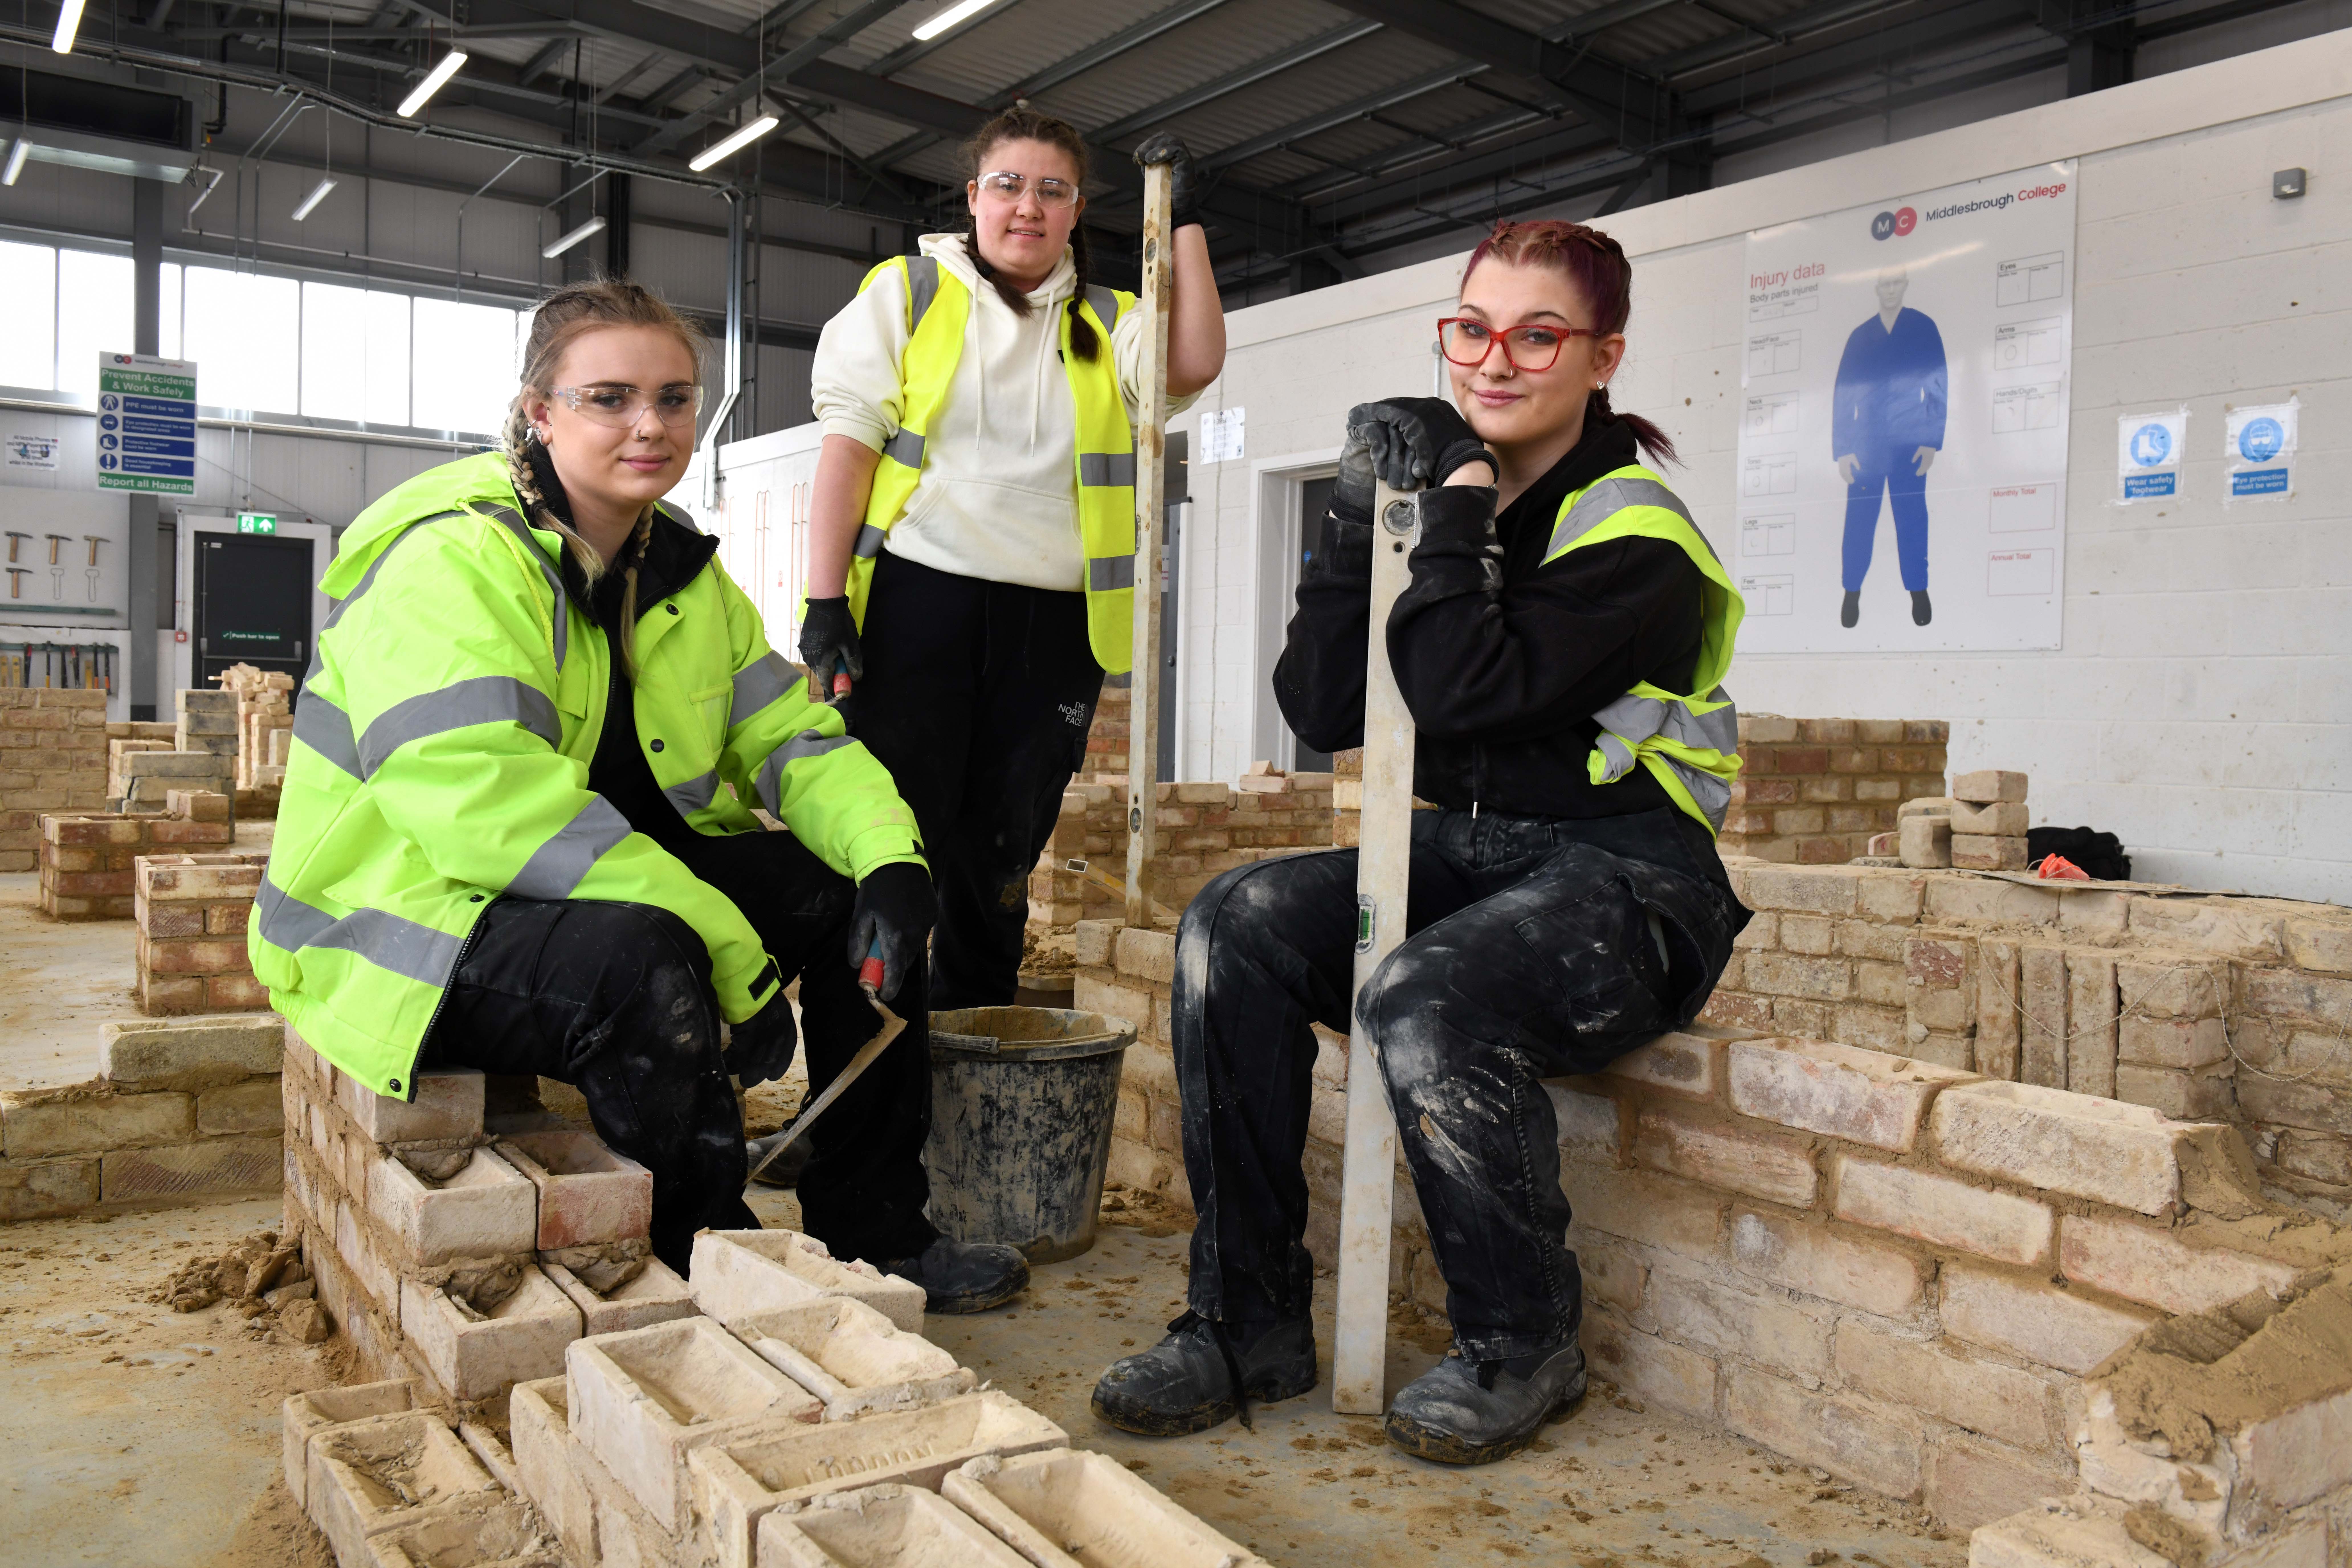 Building up a career – bricklaying students at Middlesbrough College (from left) Lily Collins, Georgia Biswas and Jessica Costello.